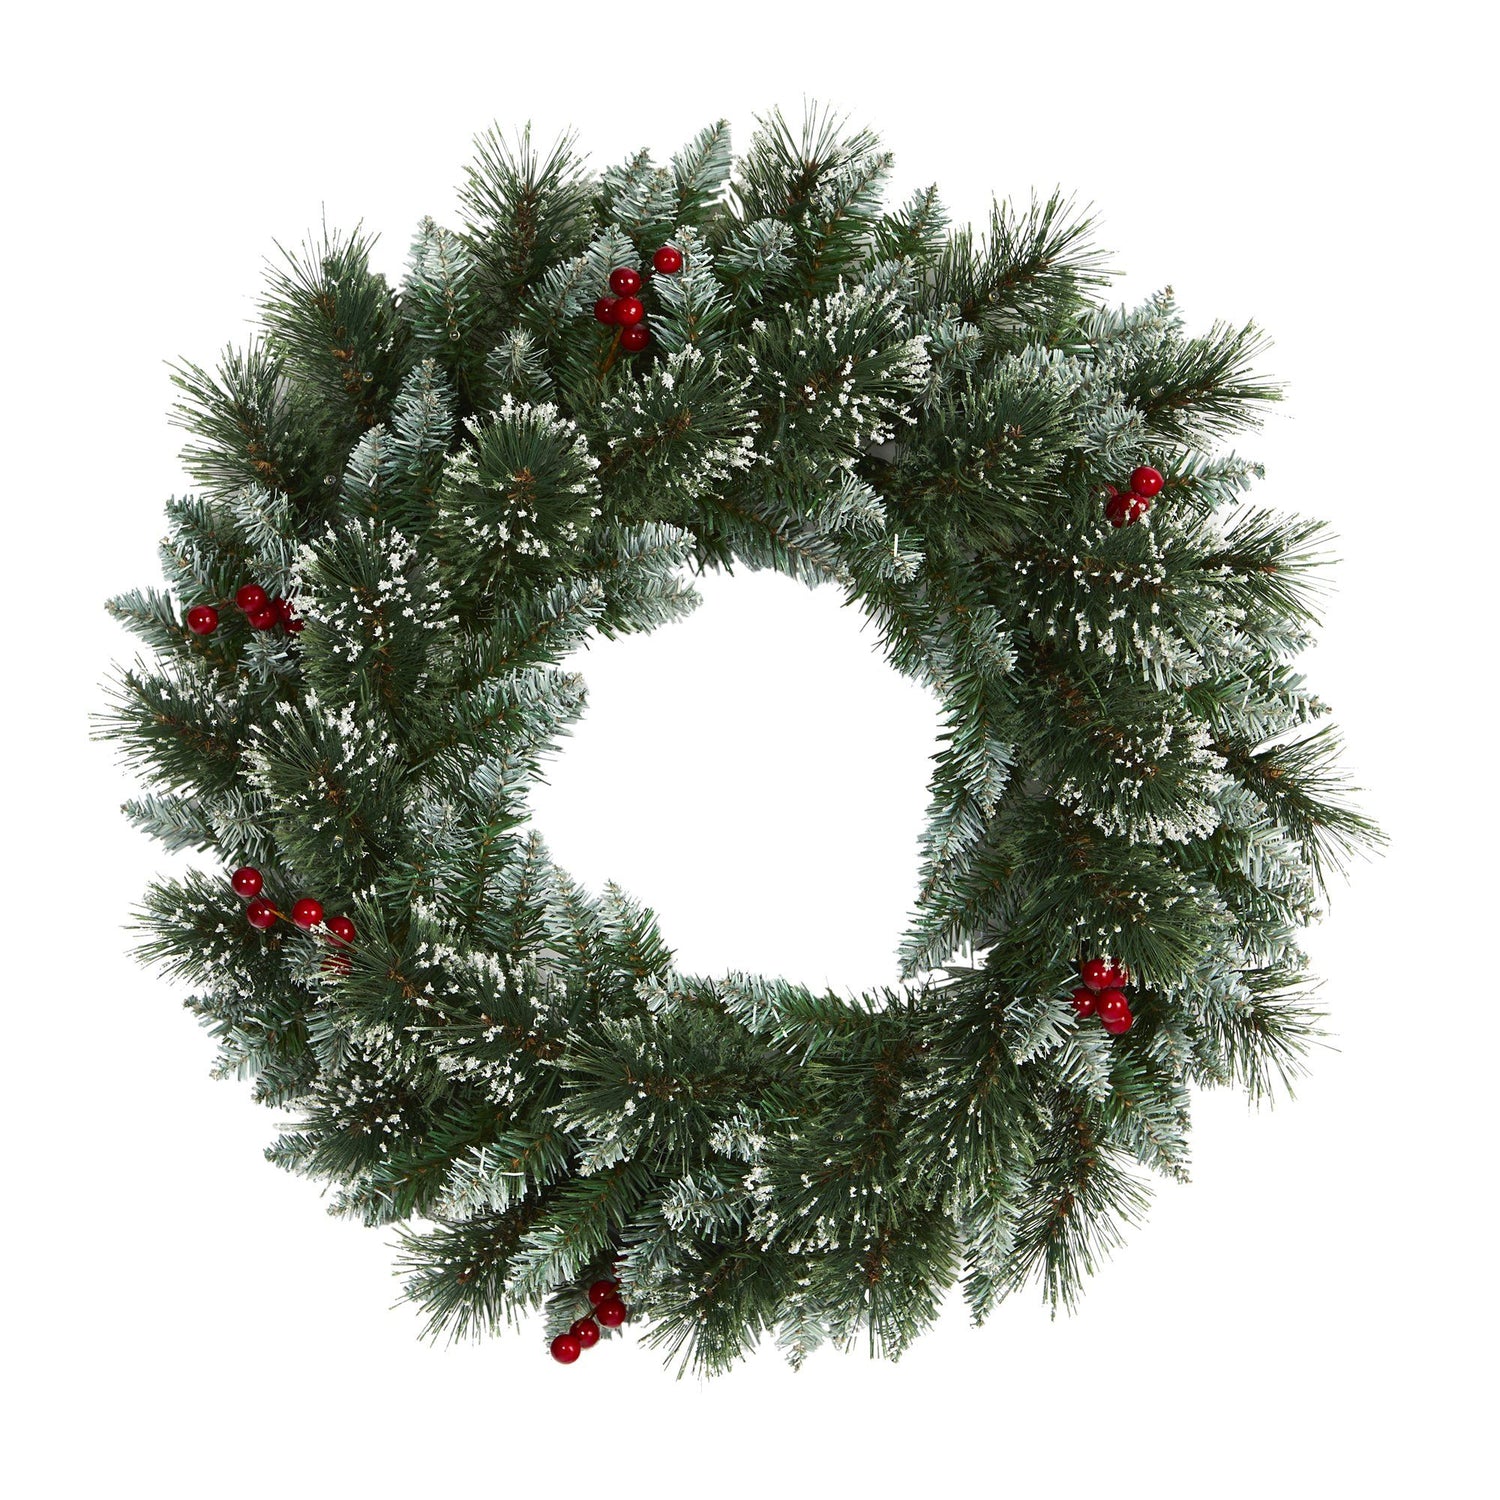 24” Frosted Swiss Pine Artificial Wreath with 35 Clear LED Lights and Berries